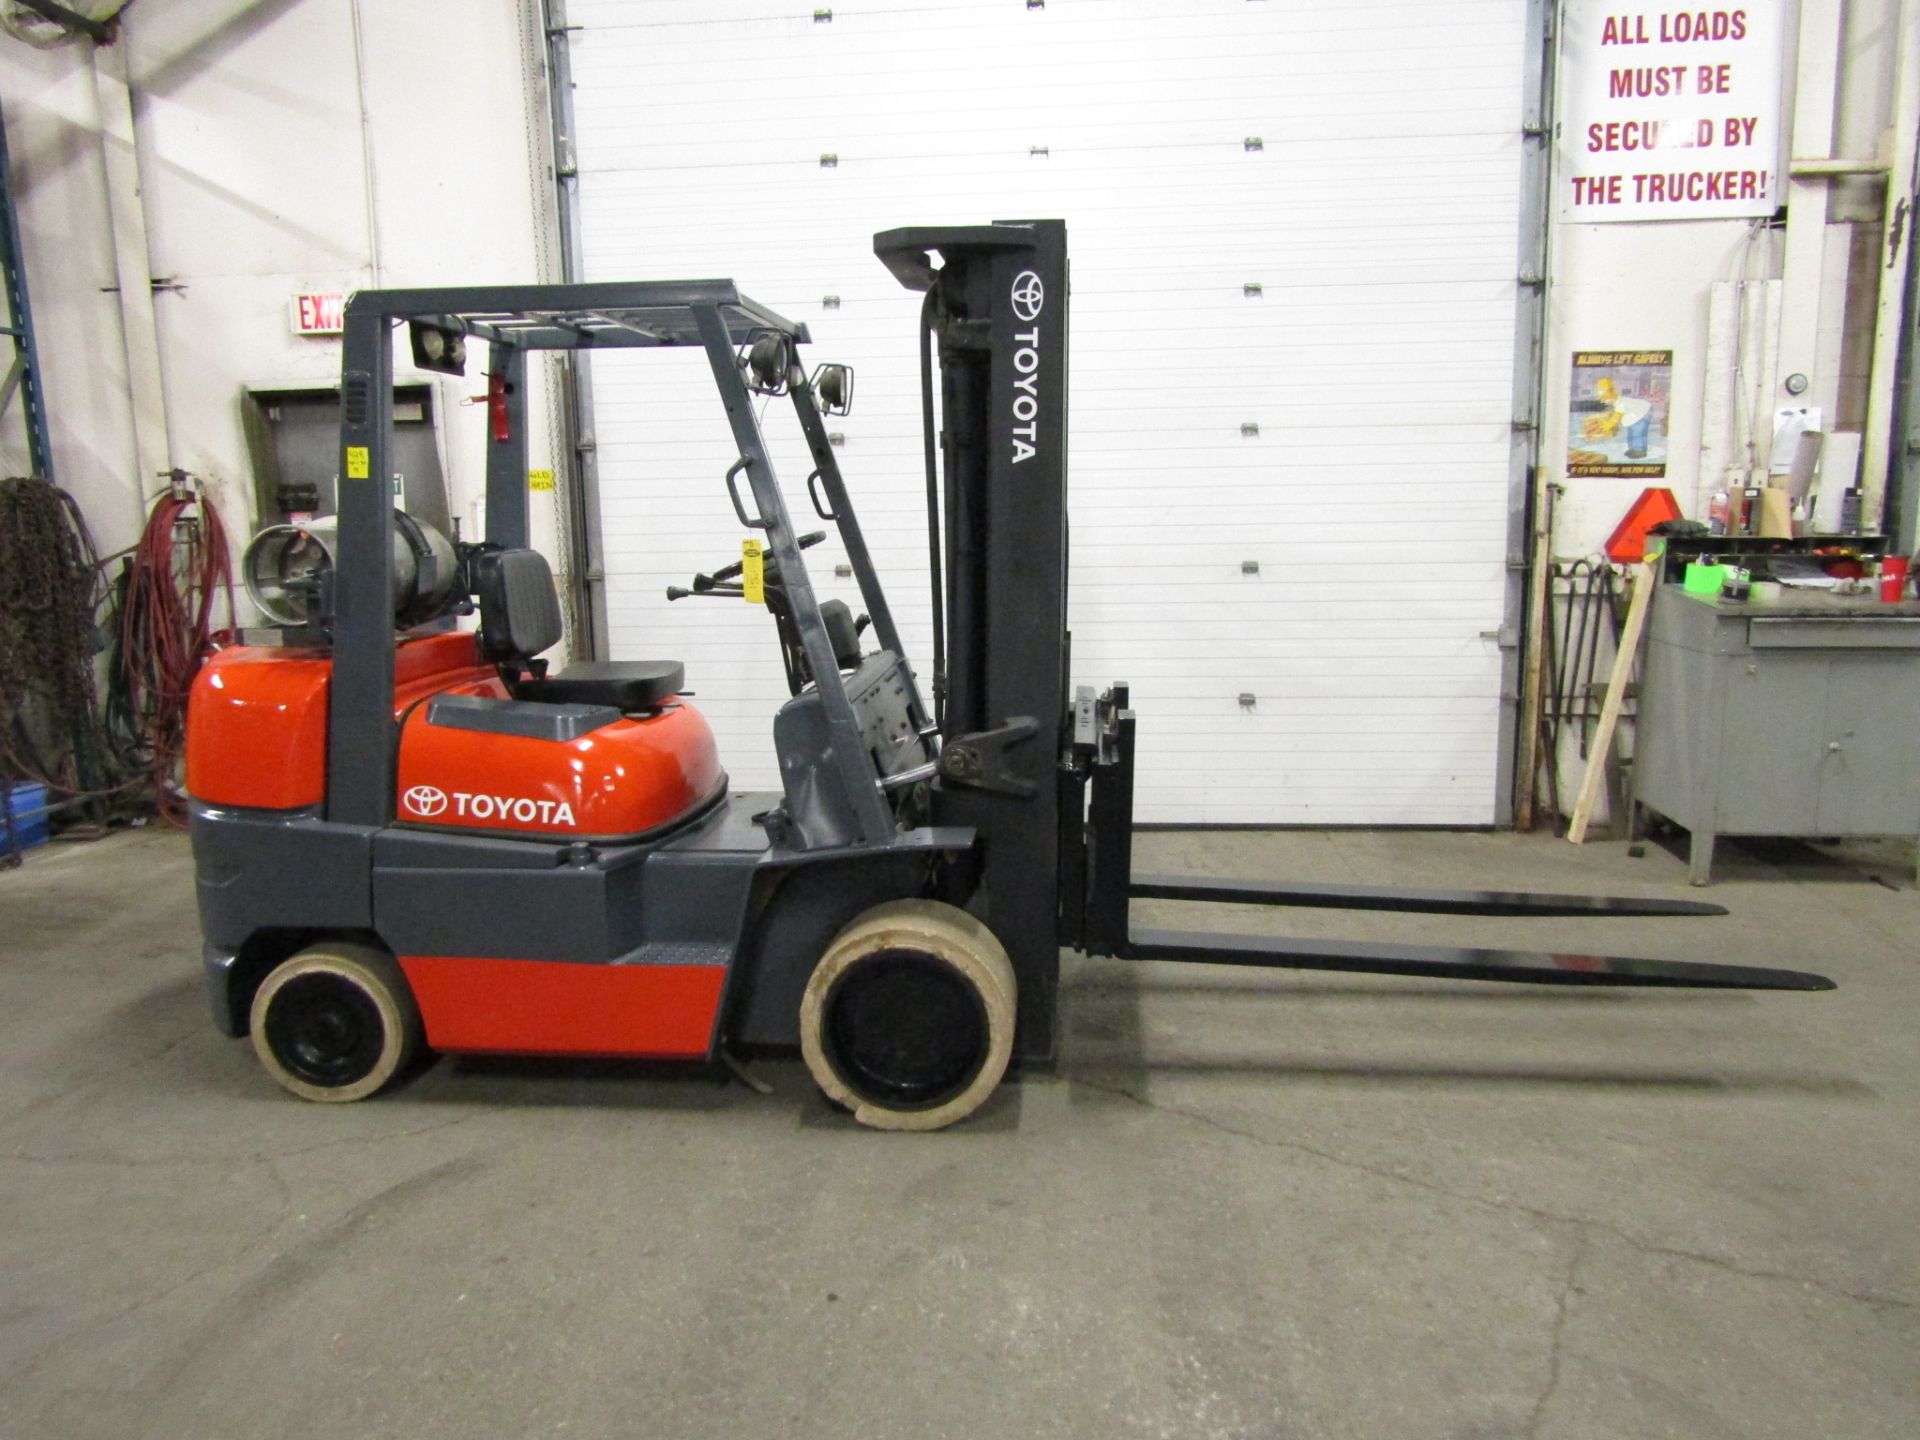 Toyota 8000lbs Capacity Forklift with 3-stage mast and sideshift with 6 FOOT forks - LPG (propane)